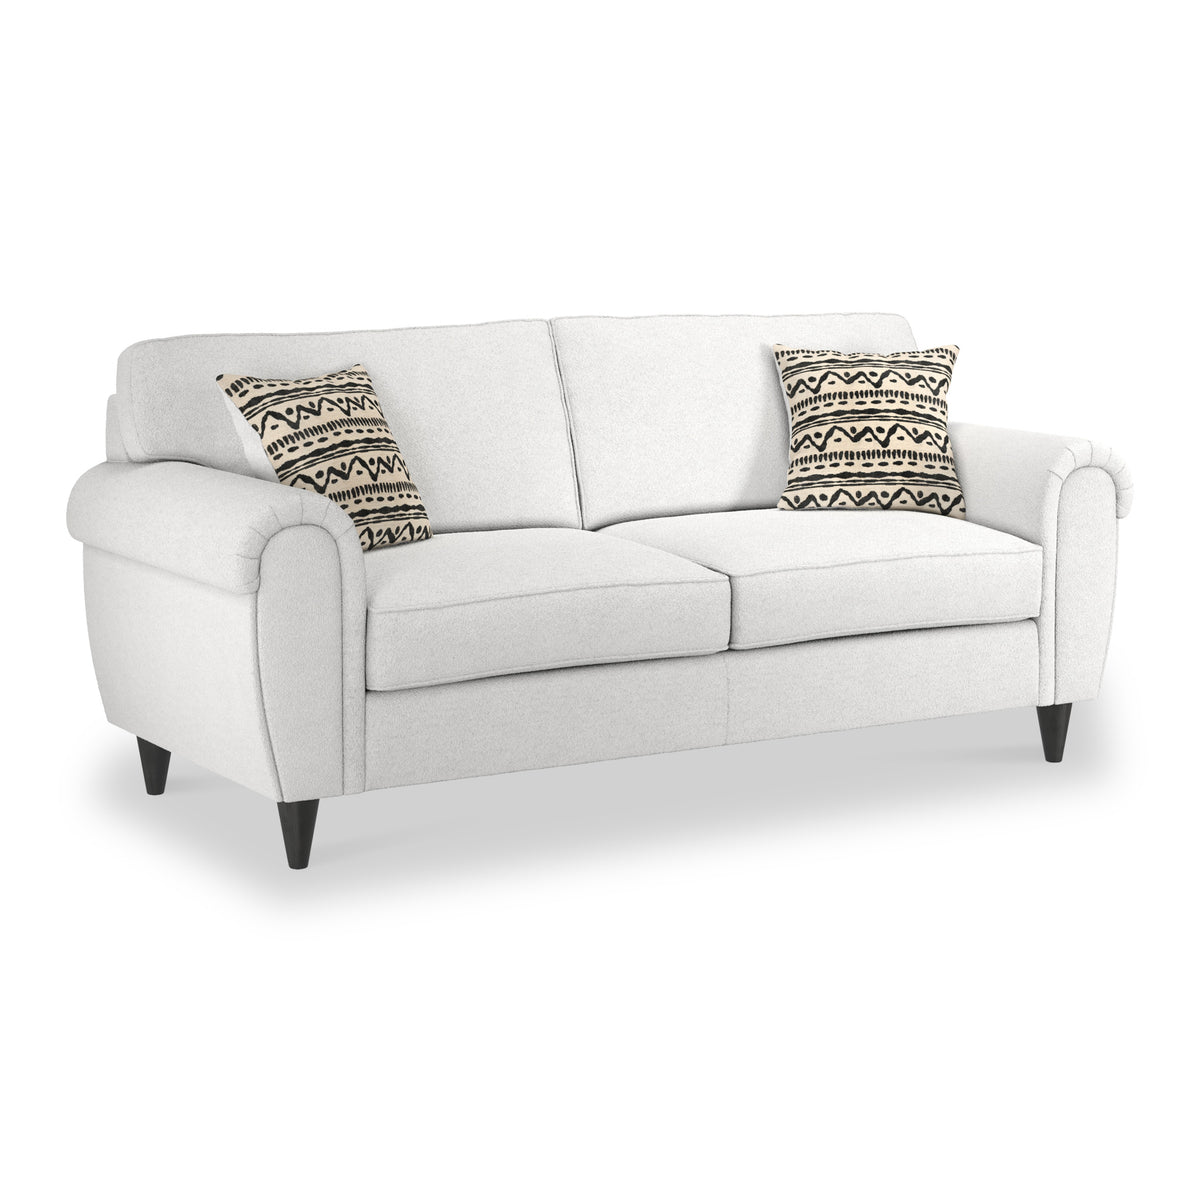 Jessie Ivory 3 Seater Sofa from Roseland Furniture